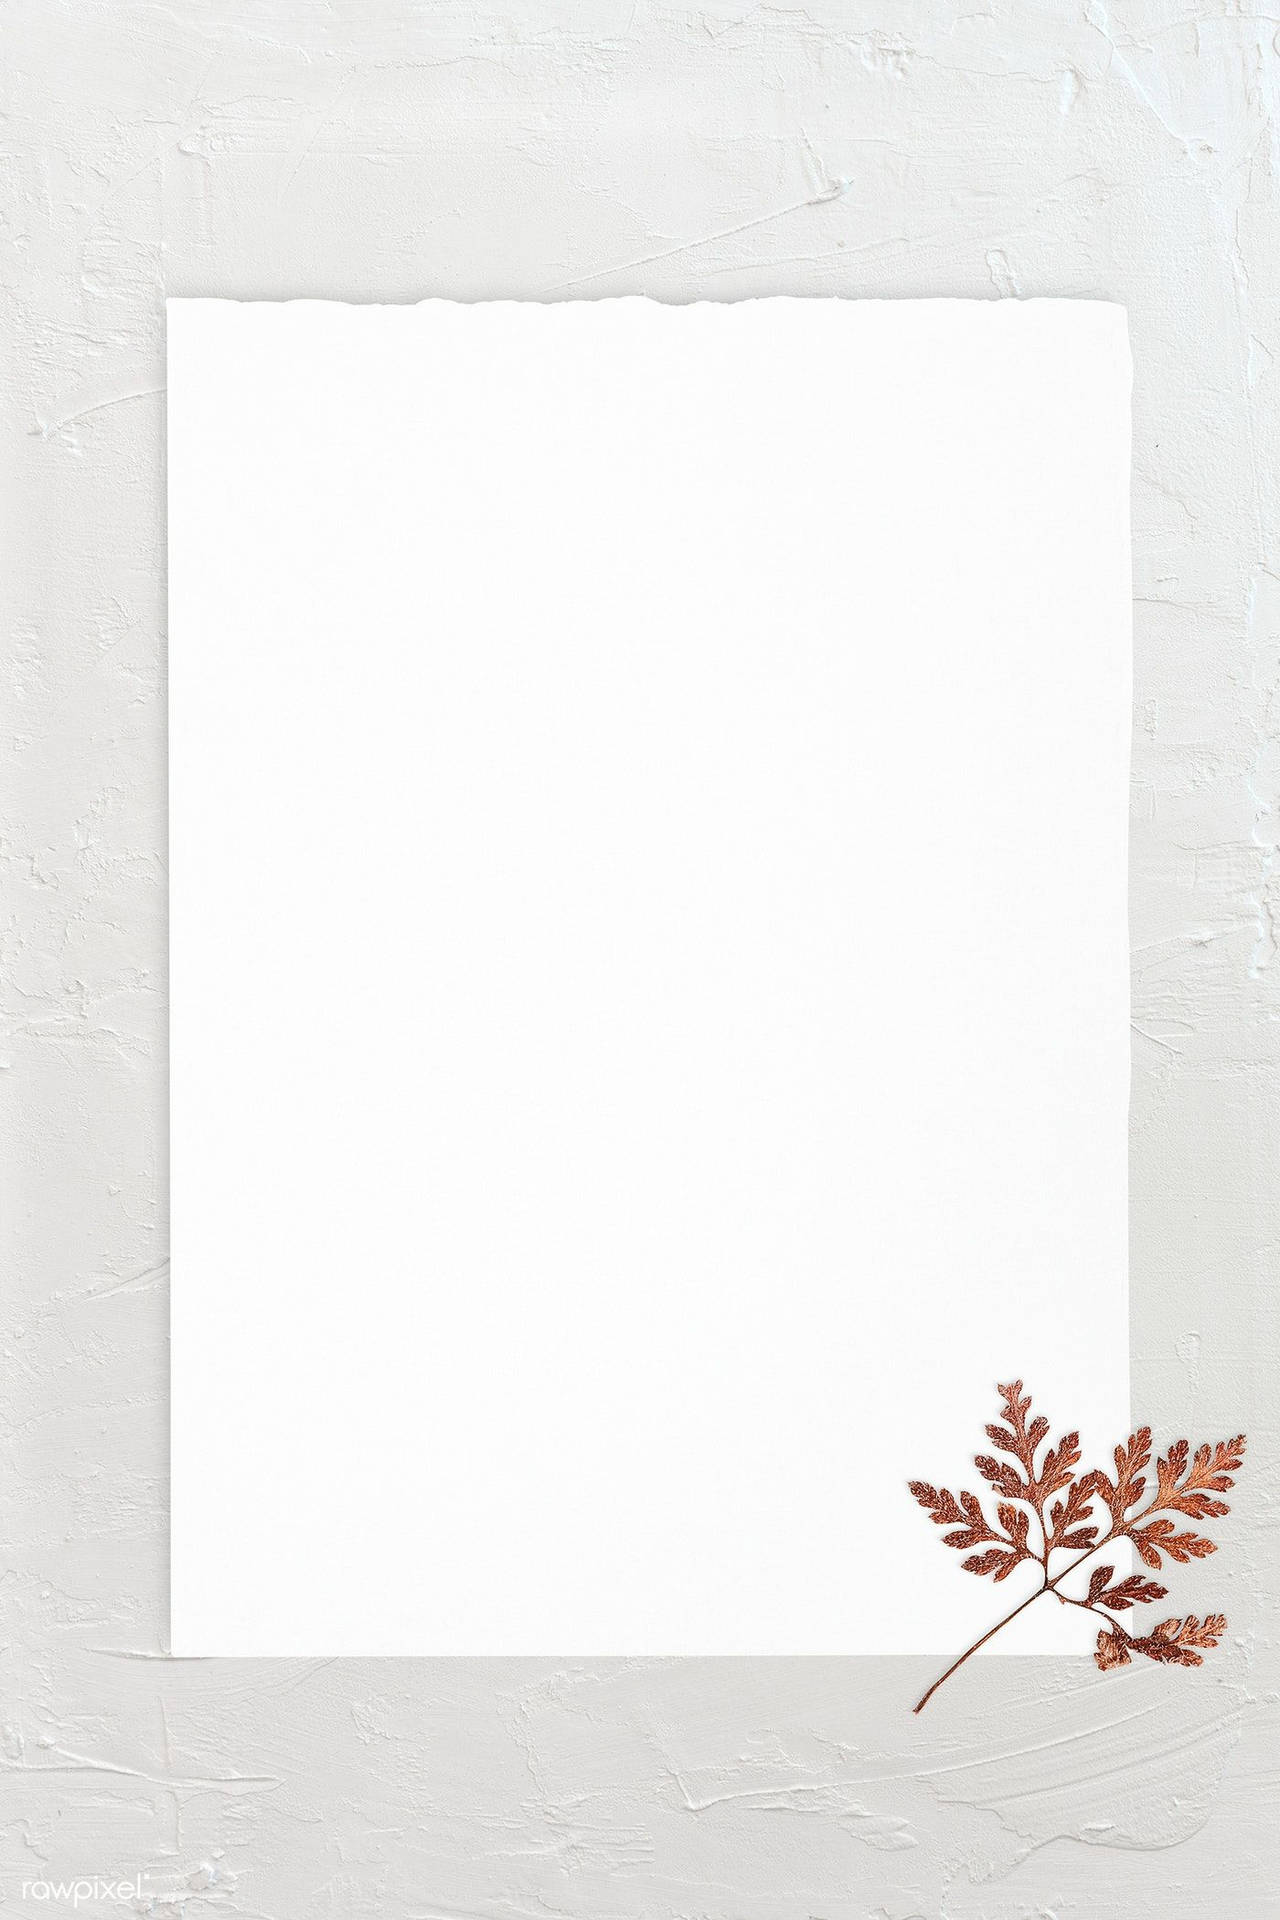 Blank White Frame With Leaf Background